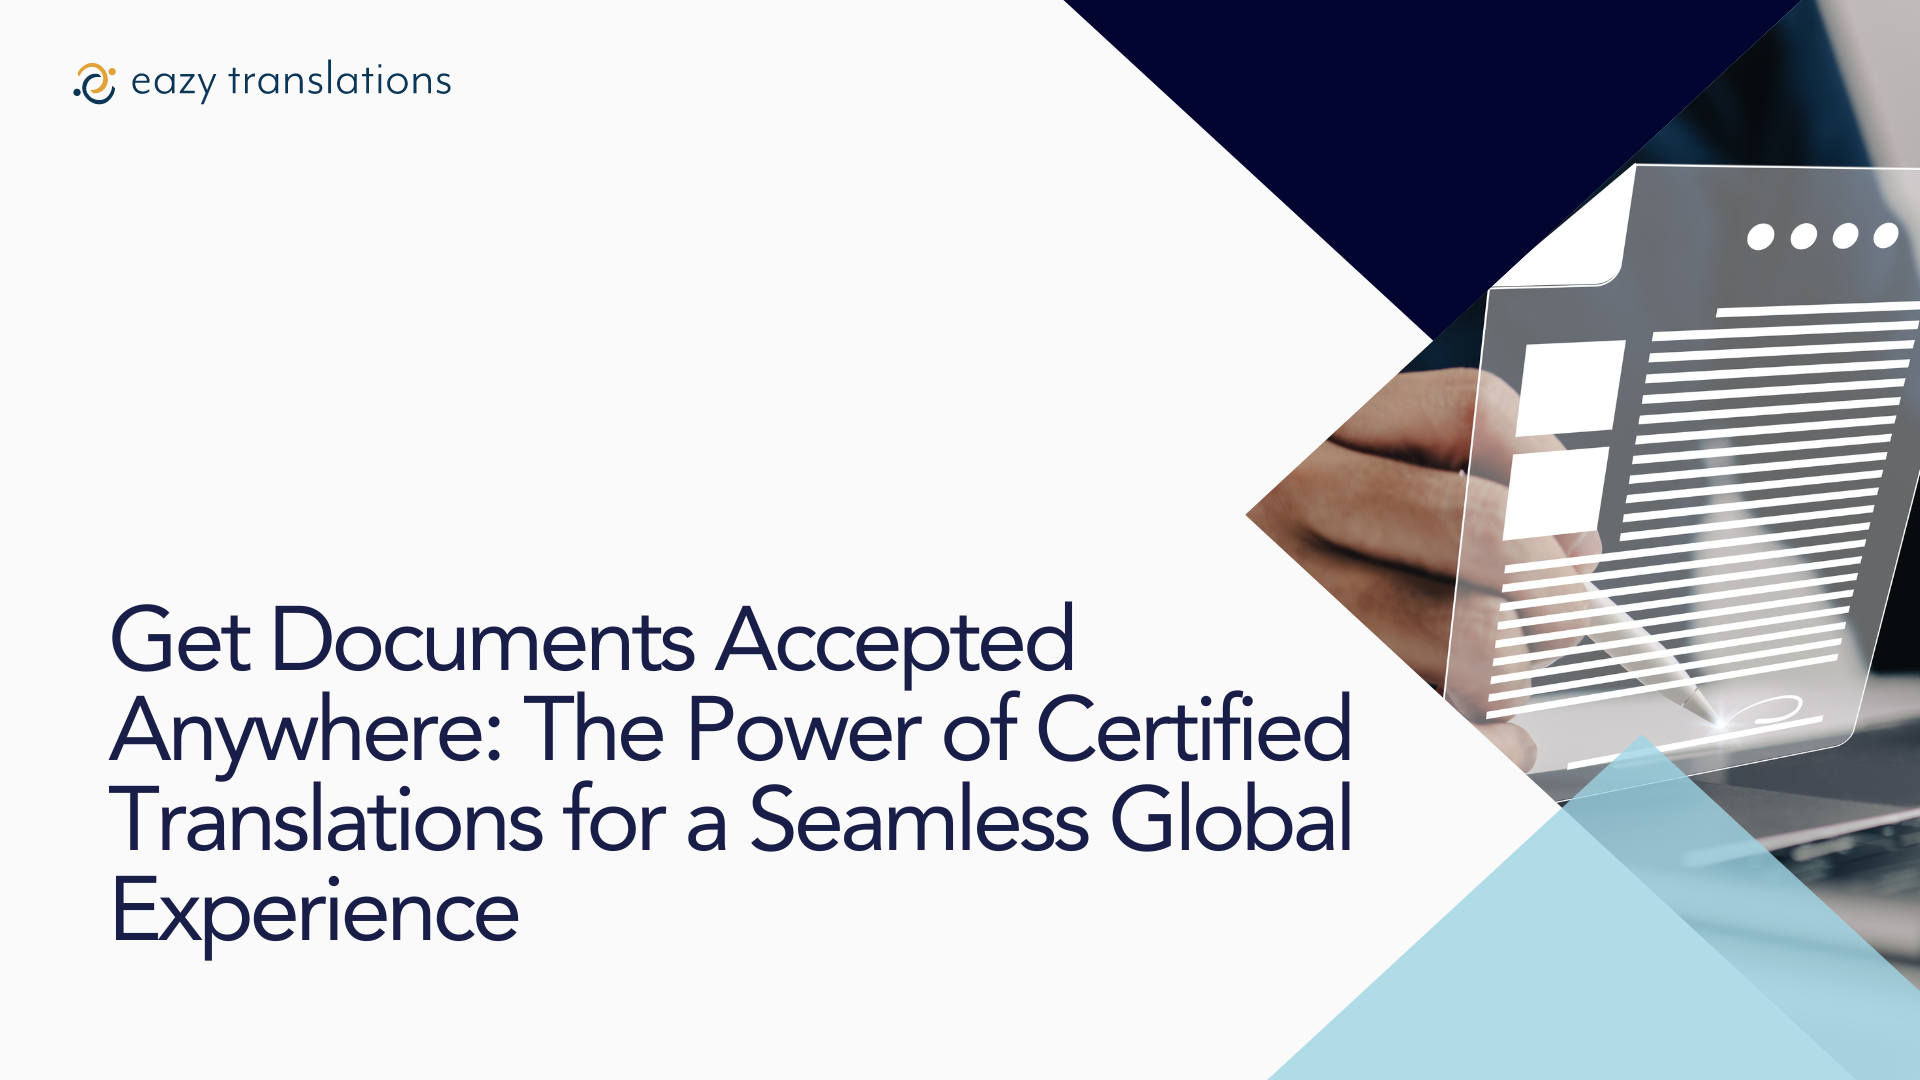 Get Documents Accepted Anywhere: The Power of Certified Translations for a Seamless Global Experience